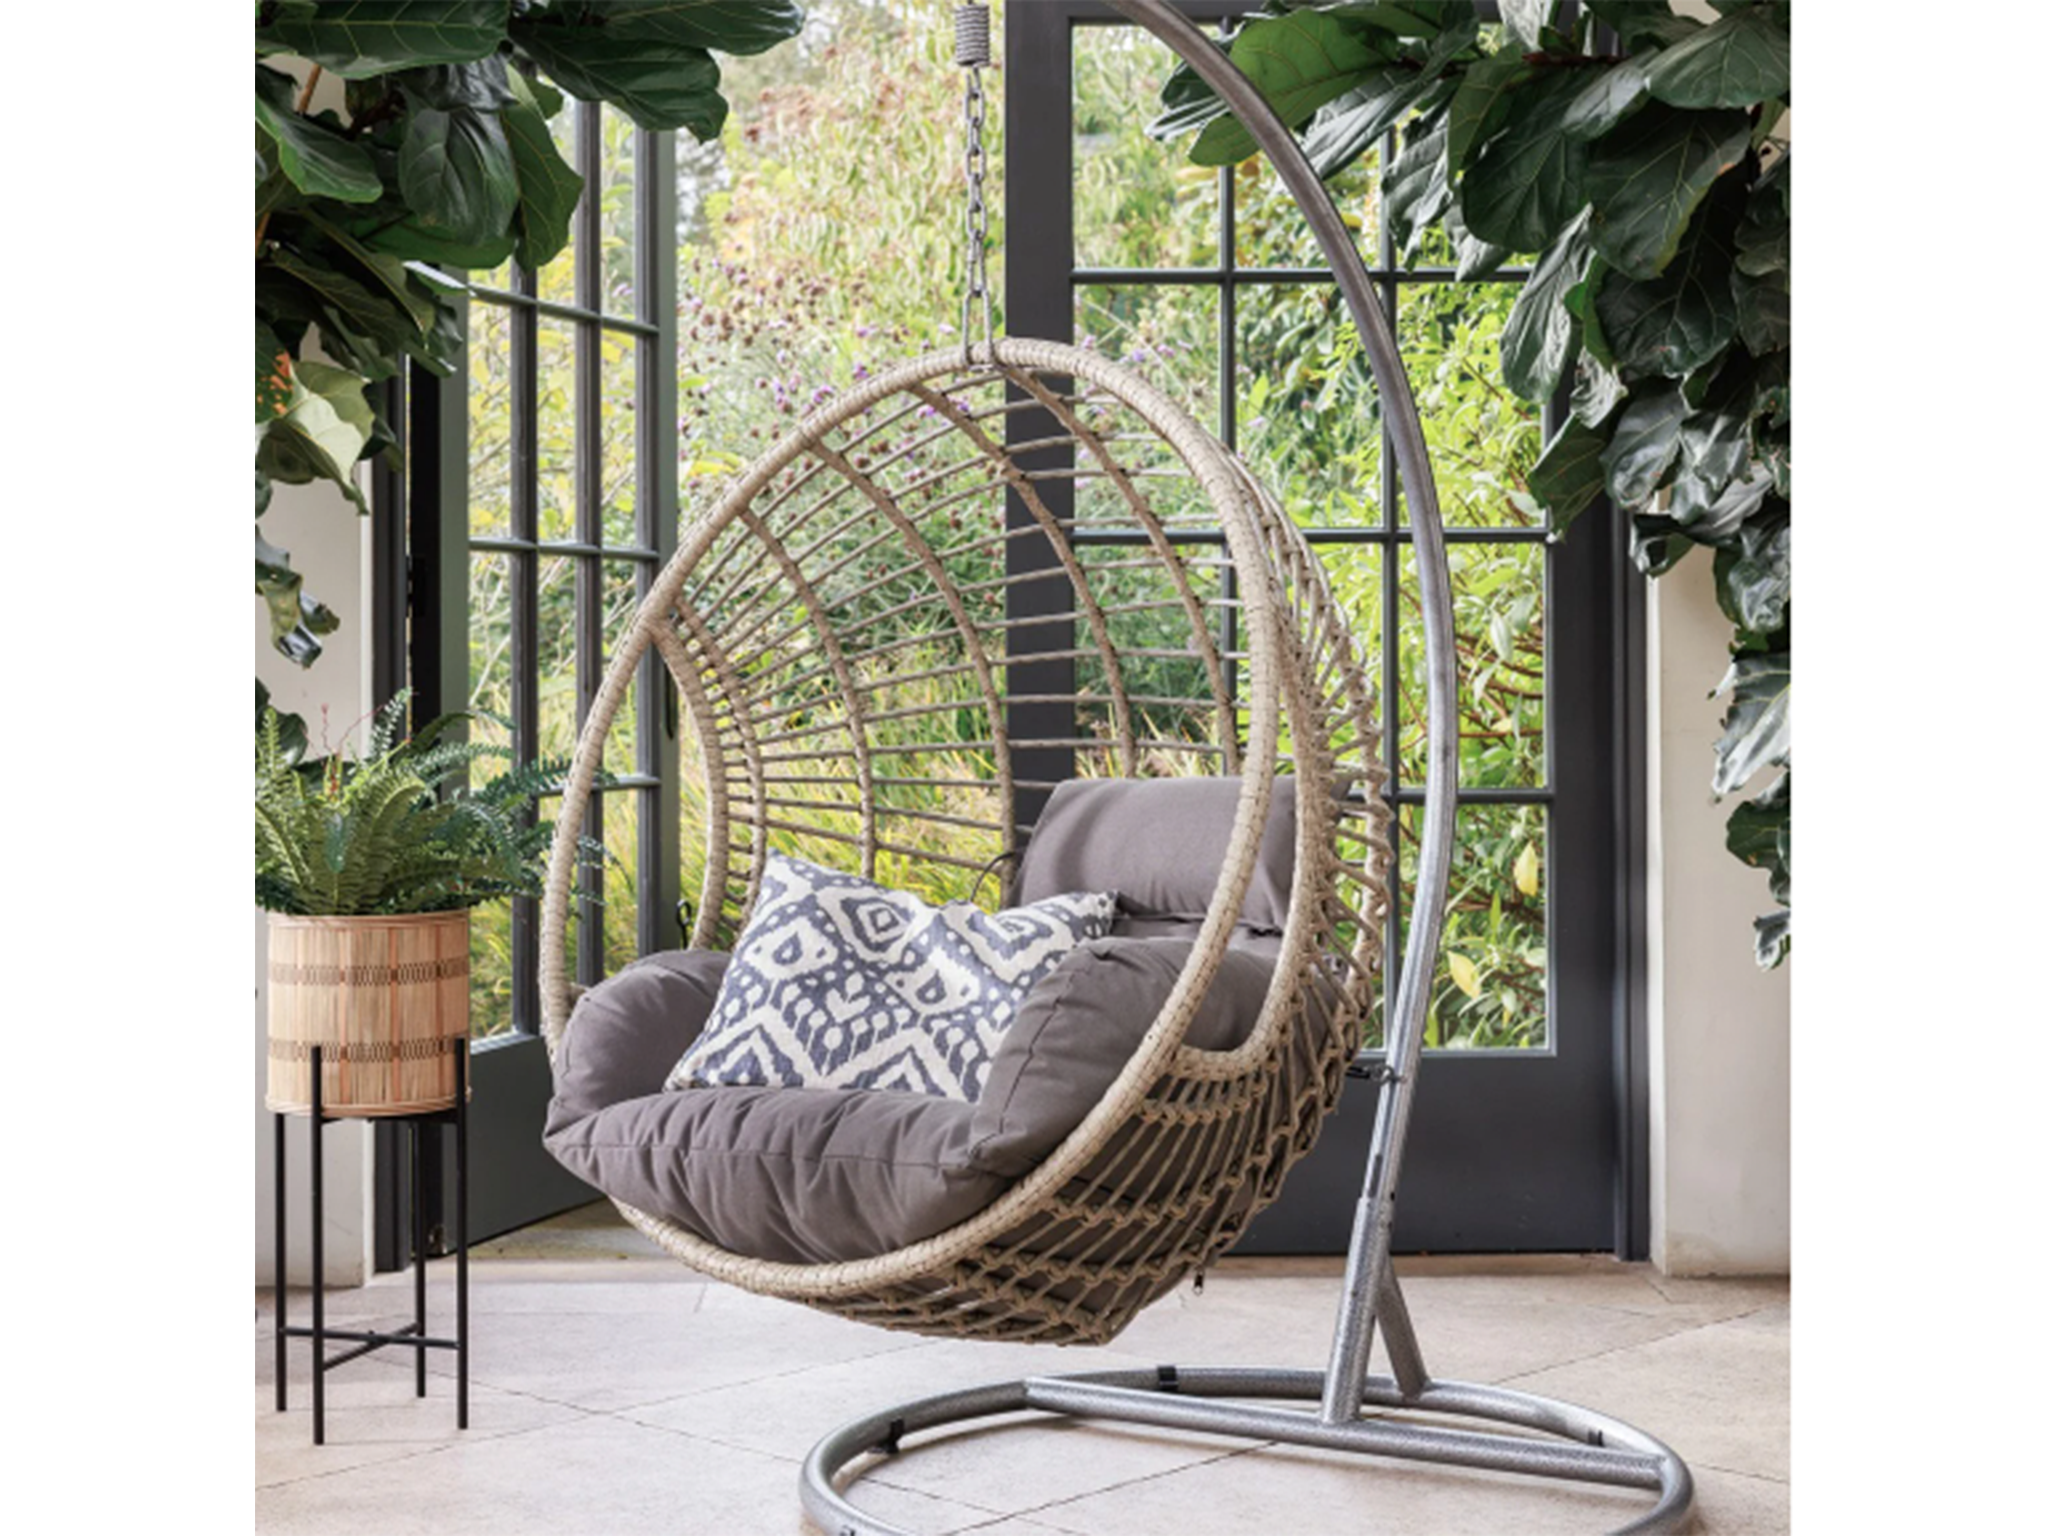 Barker and Stonehouse Castello natural garden swing hanging chair 